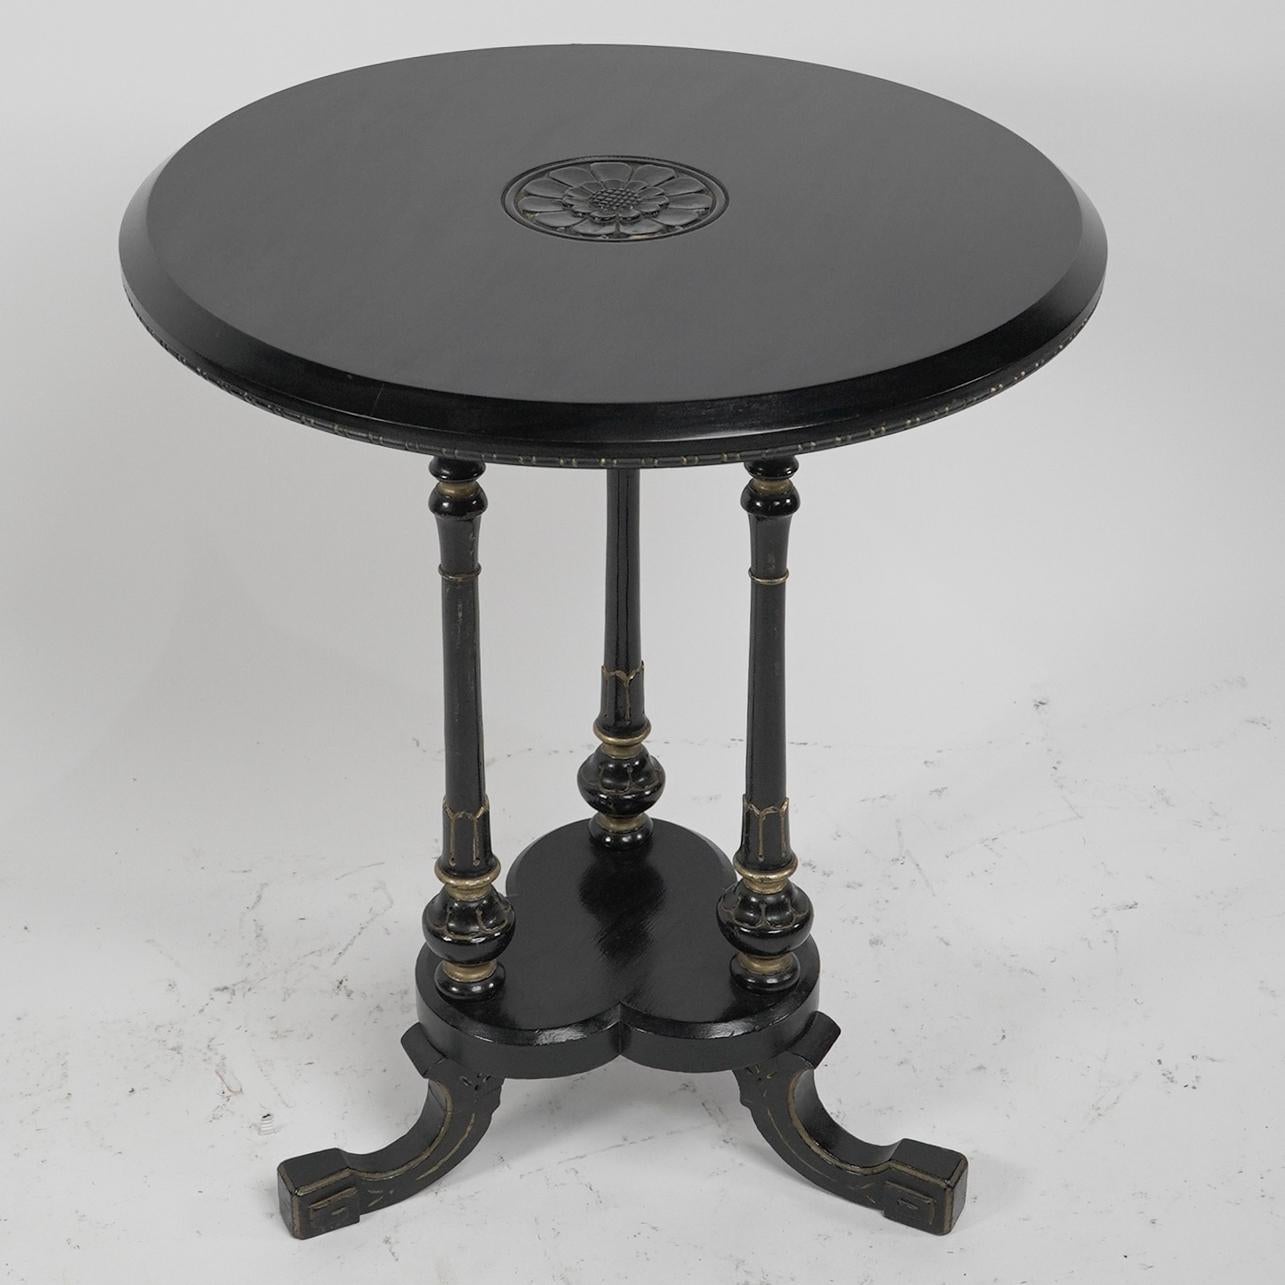 Gillows attributed. An Aesthetic Movement ebonized circular side table with carved sunflower floret to the top with three turned, carved and incised gilt decoration to the legs and to the splayed feet which unite to a trefoil floret lower shelf.